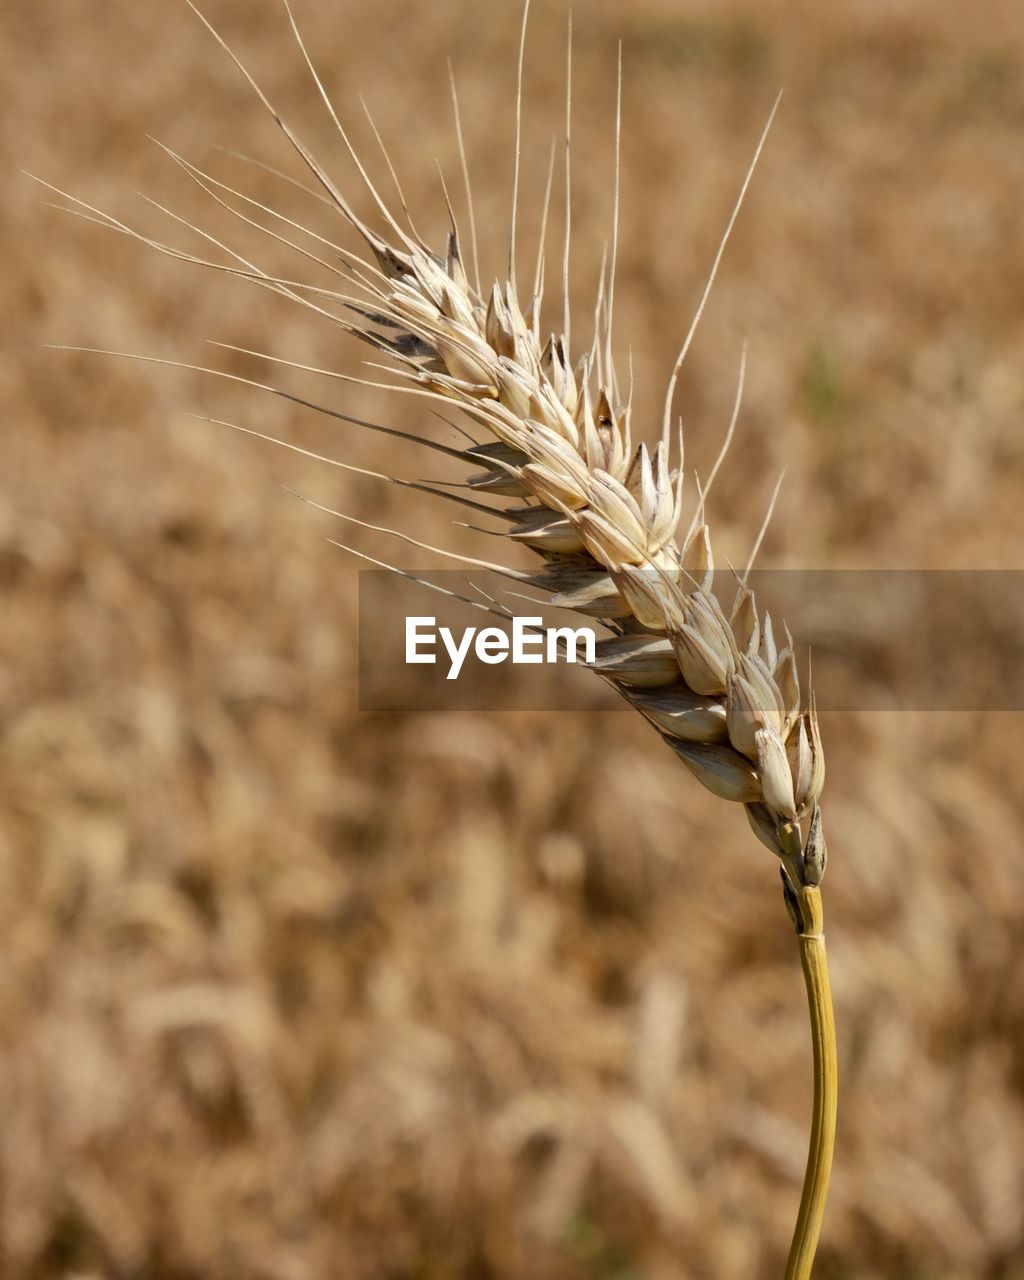 cereal plant, crop, agriculture, food, plant, rural scene, wheat, nature, close-up, field, landscape, grass, land, food and drink, barley, growth, food grain, rye, focus on foreground, farm, soil, seed, no people, summer, whole grain, cereal, outdoors, environment, gold, beauty in nature, hordeum, harvesting, plant stem, ripe, brown, einkorn wheat, cultivated, prairie, macro, organic, vegetable, dry, selective focus, triticale